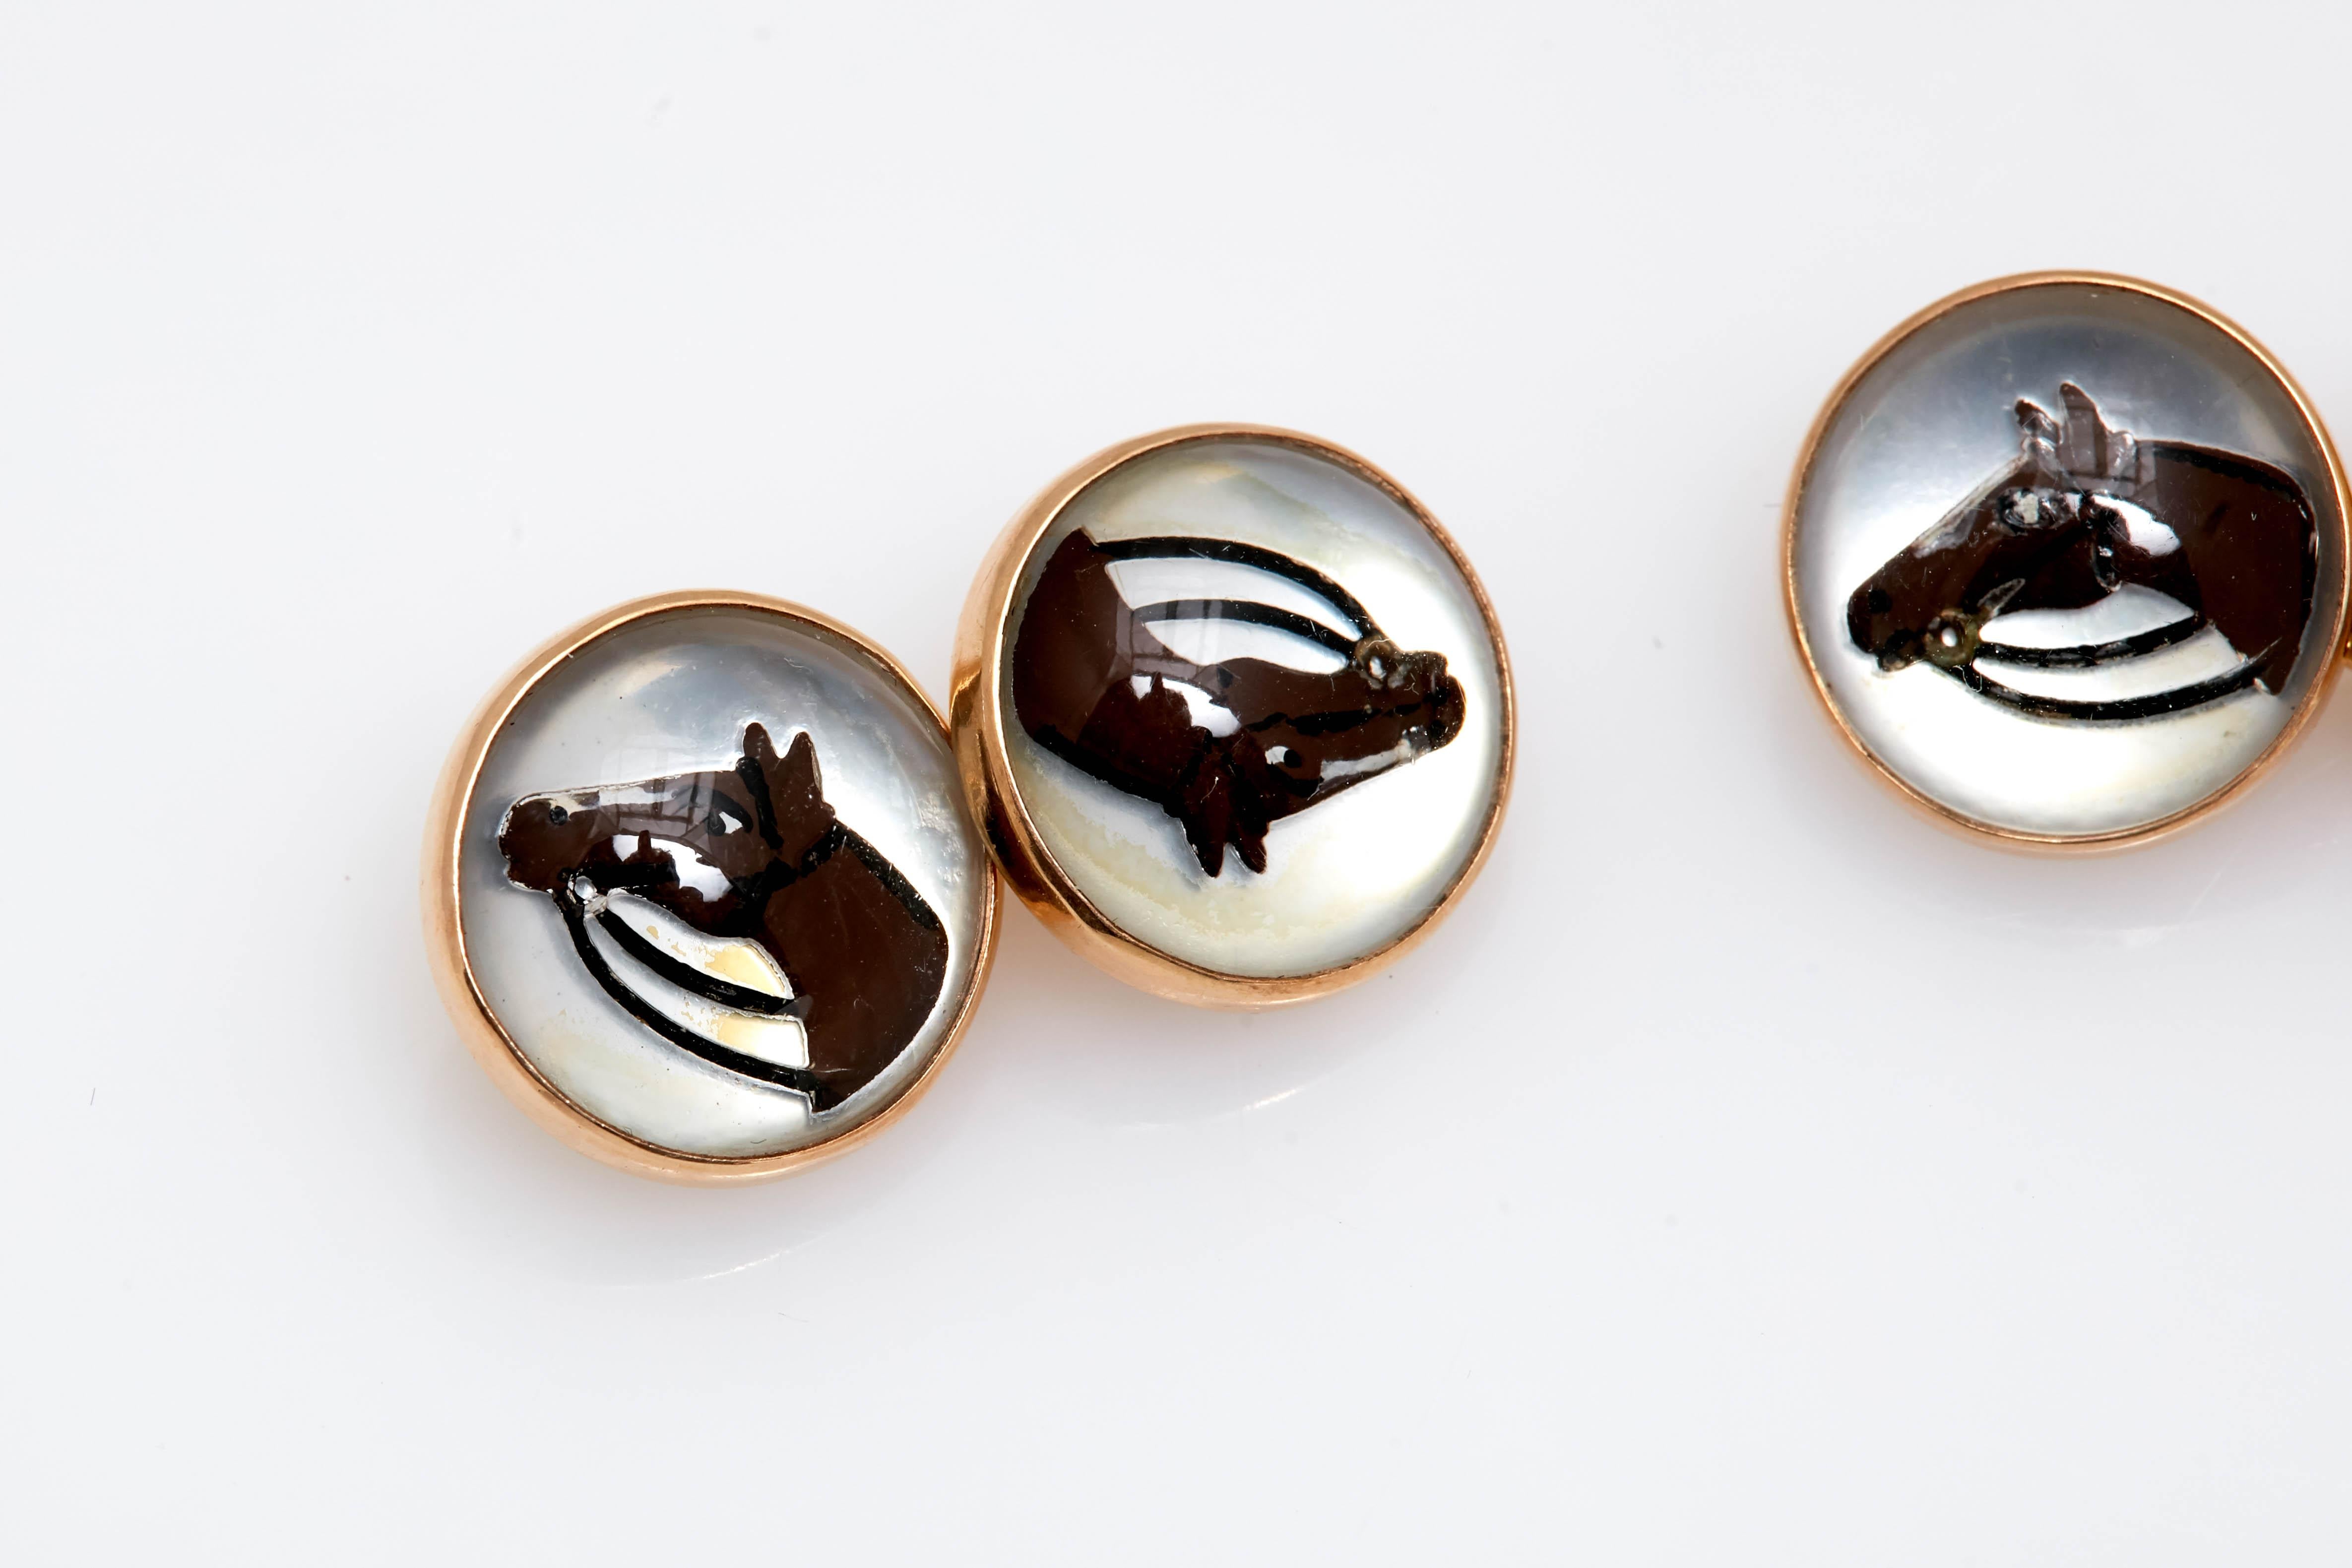 A pair of cufflinks in 14kt yellow gold with horse enamel decorations. Made in the United States, circa 1950